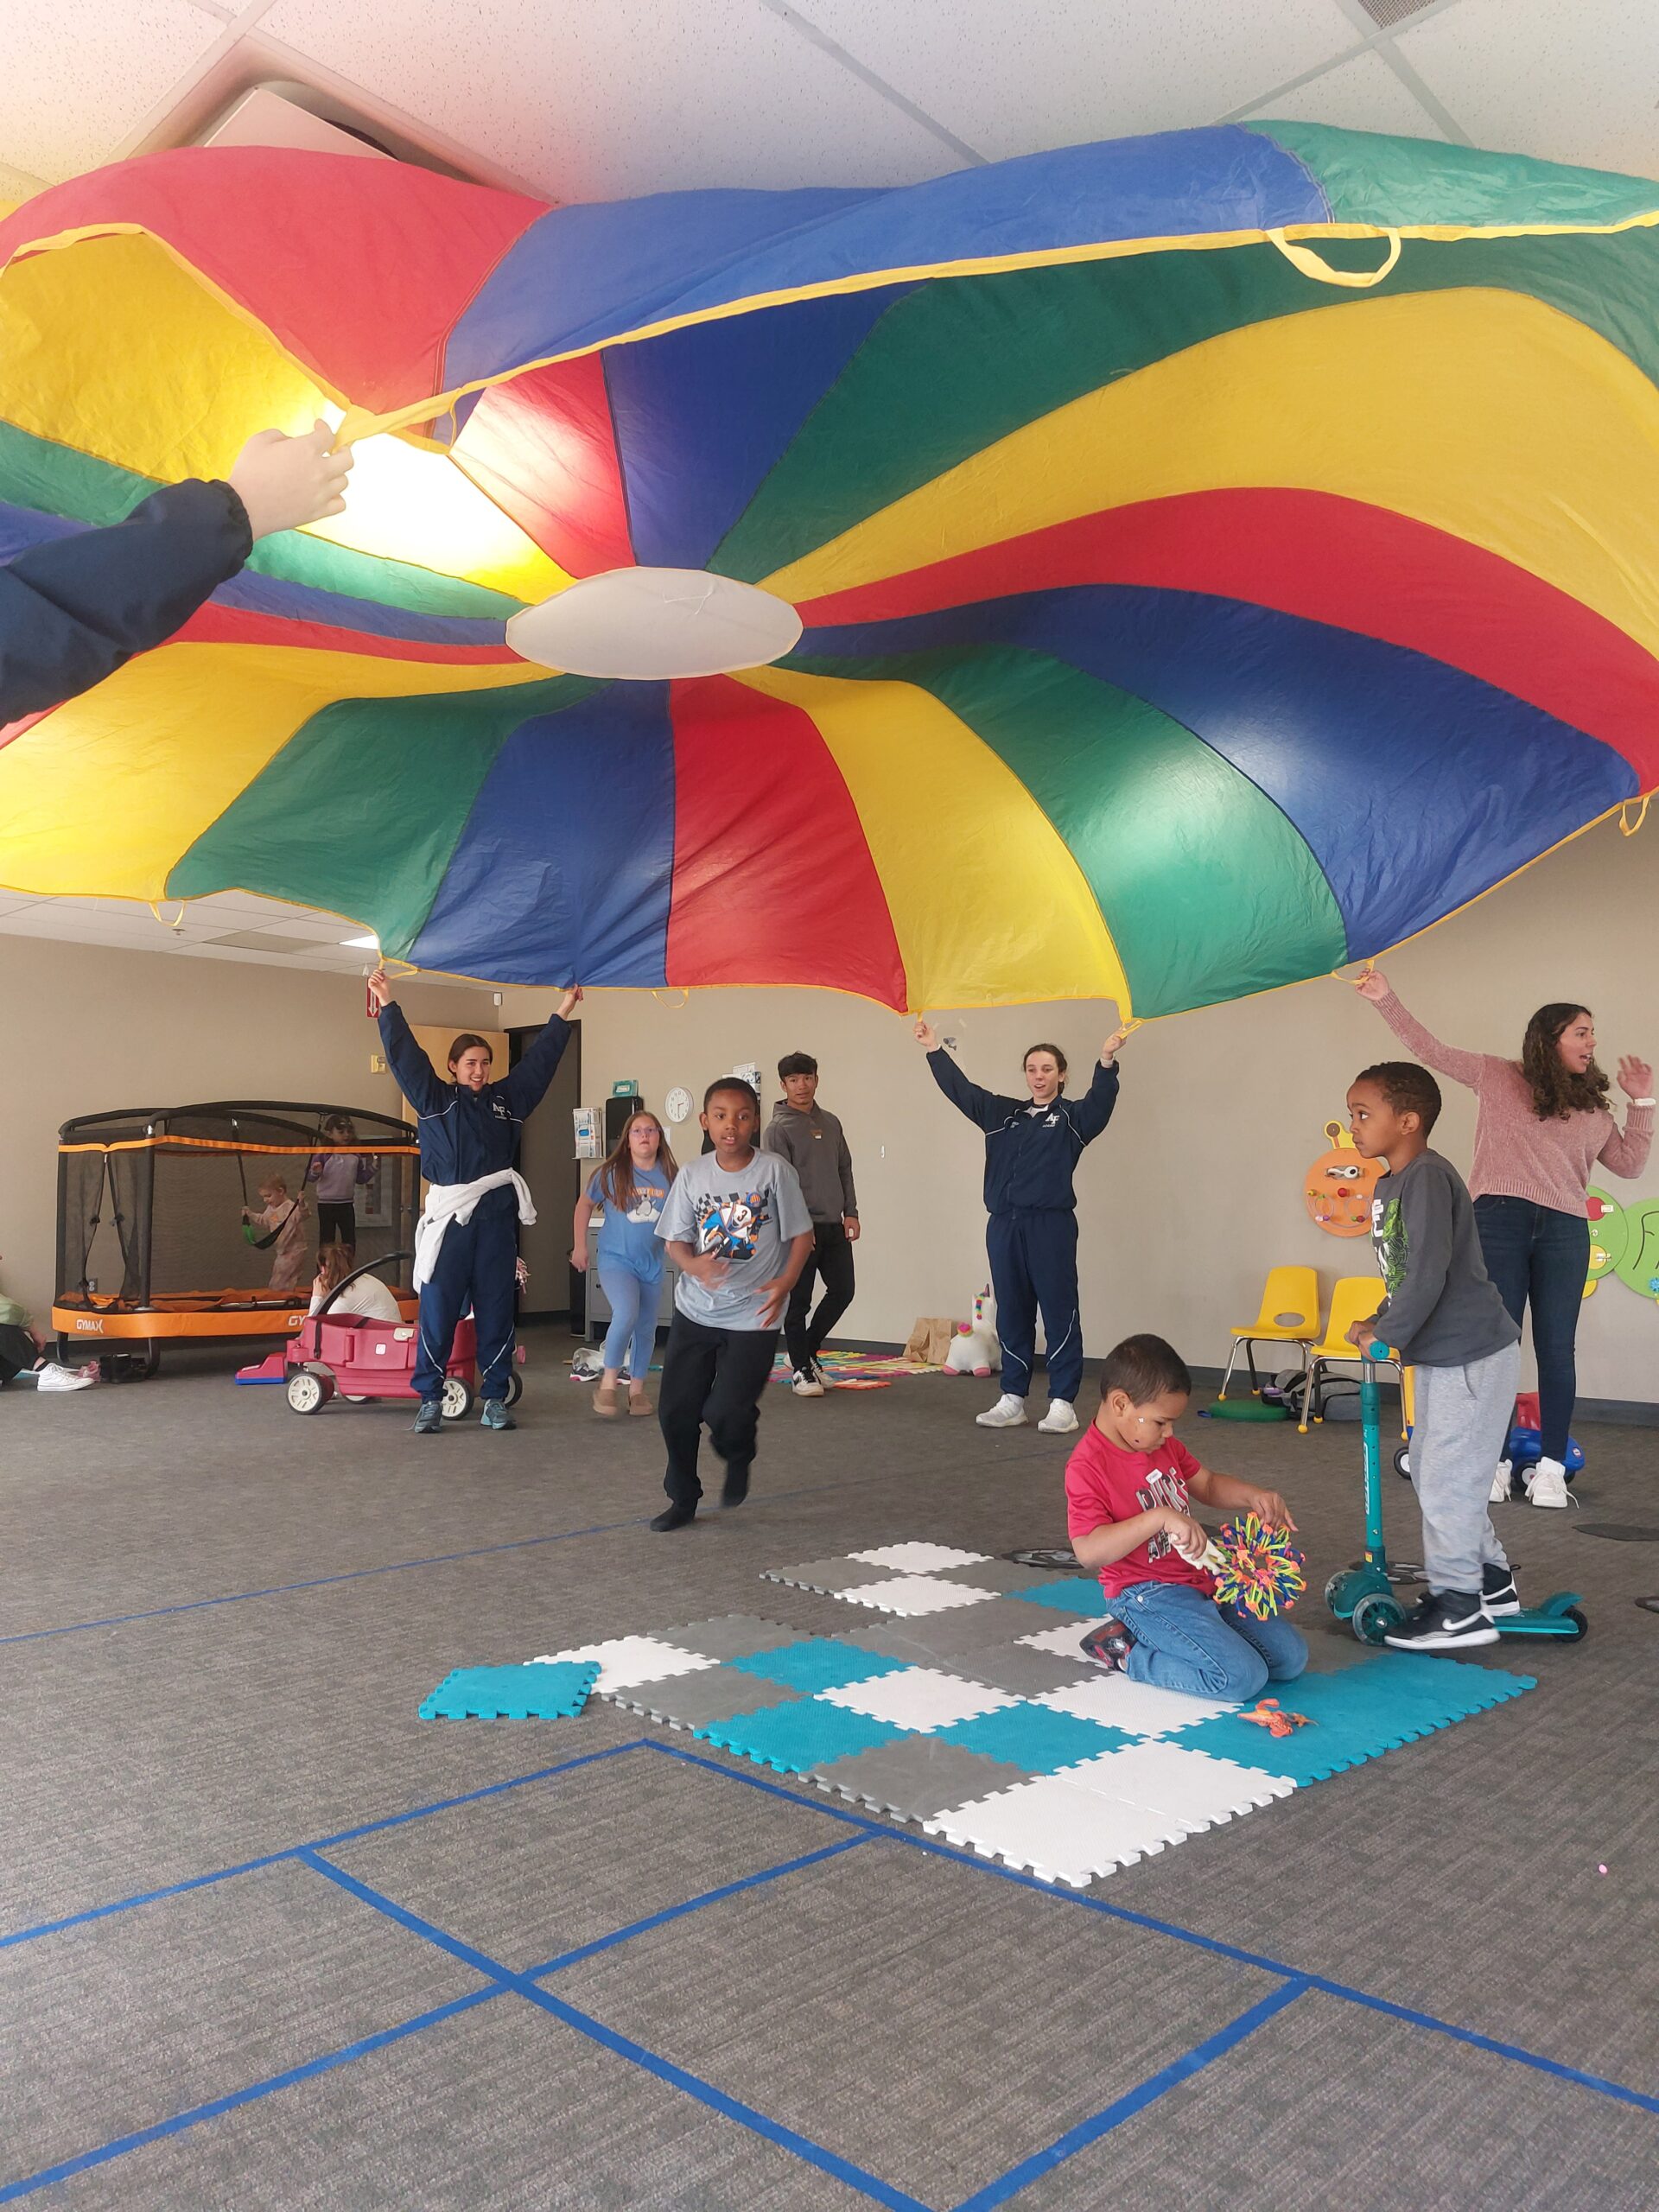 children play indoors with a large colorful parachute